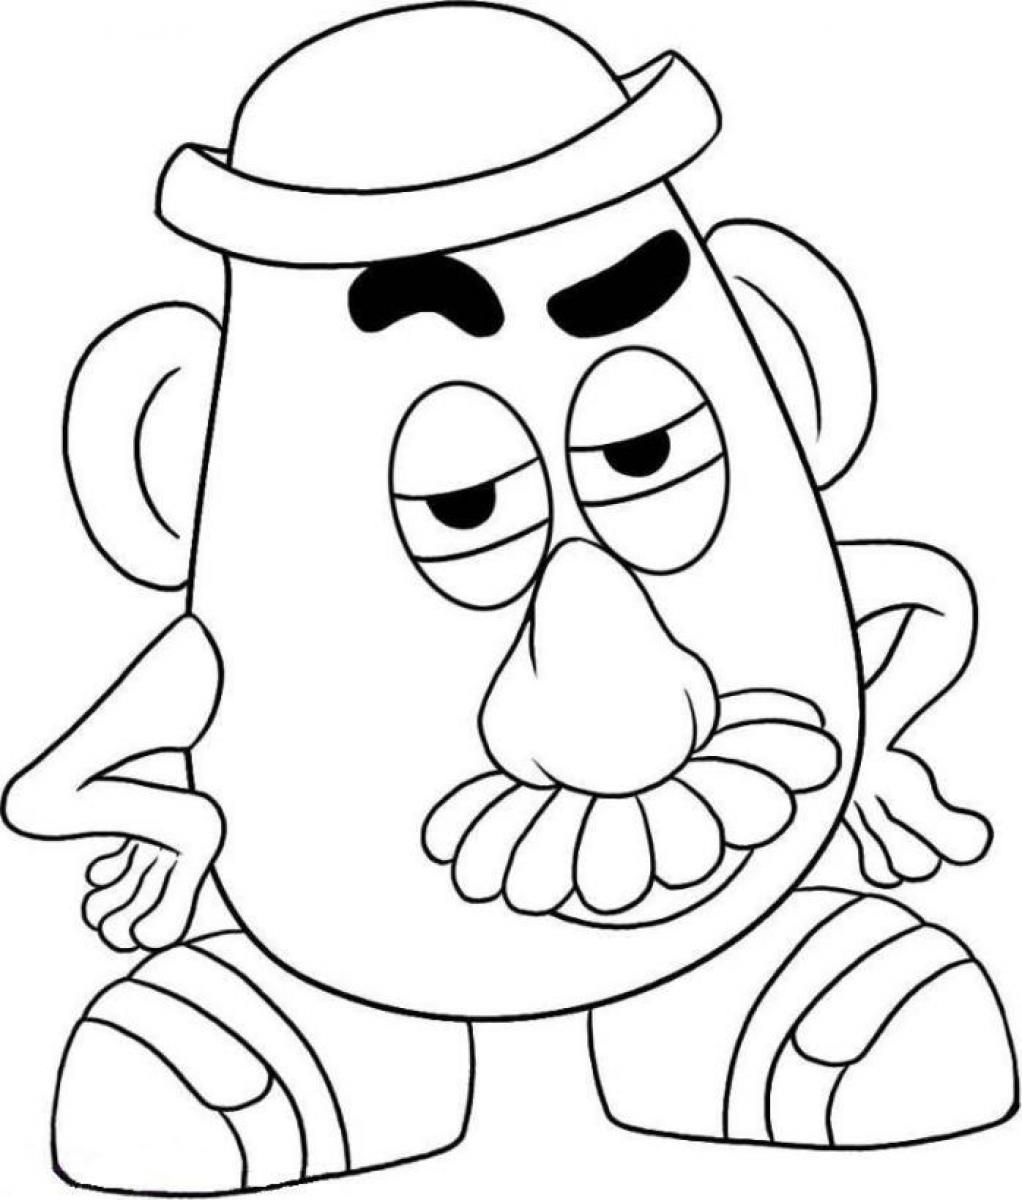 Toy Story Mr Potato Head Coloring Pages - High Quality Coloring Pages